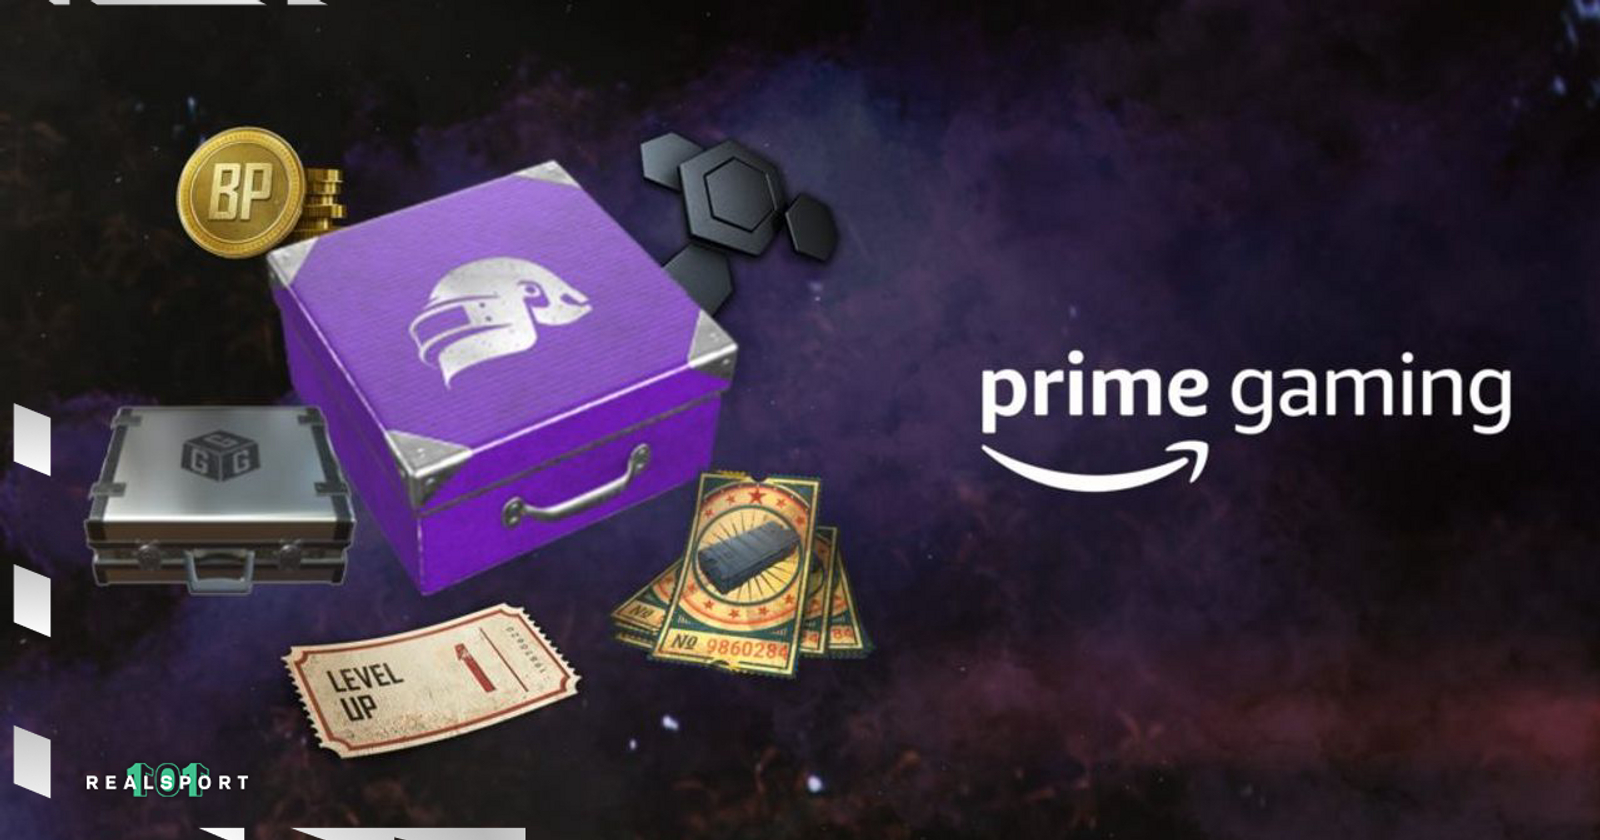 League of Legends: August Prime Gaming details and rewards - Not A